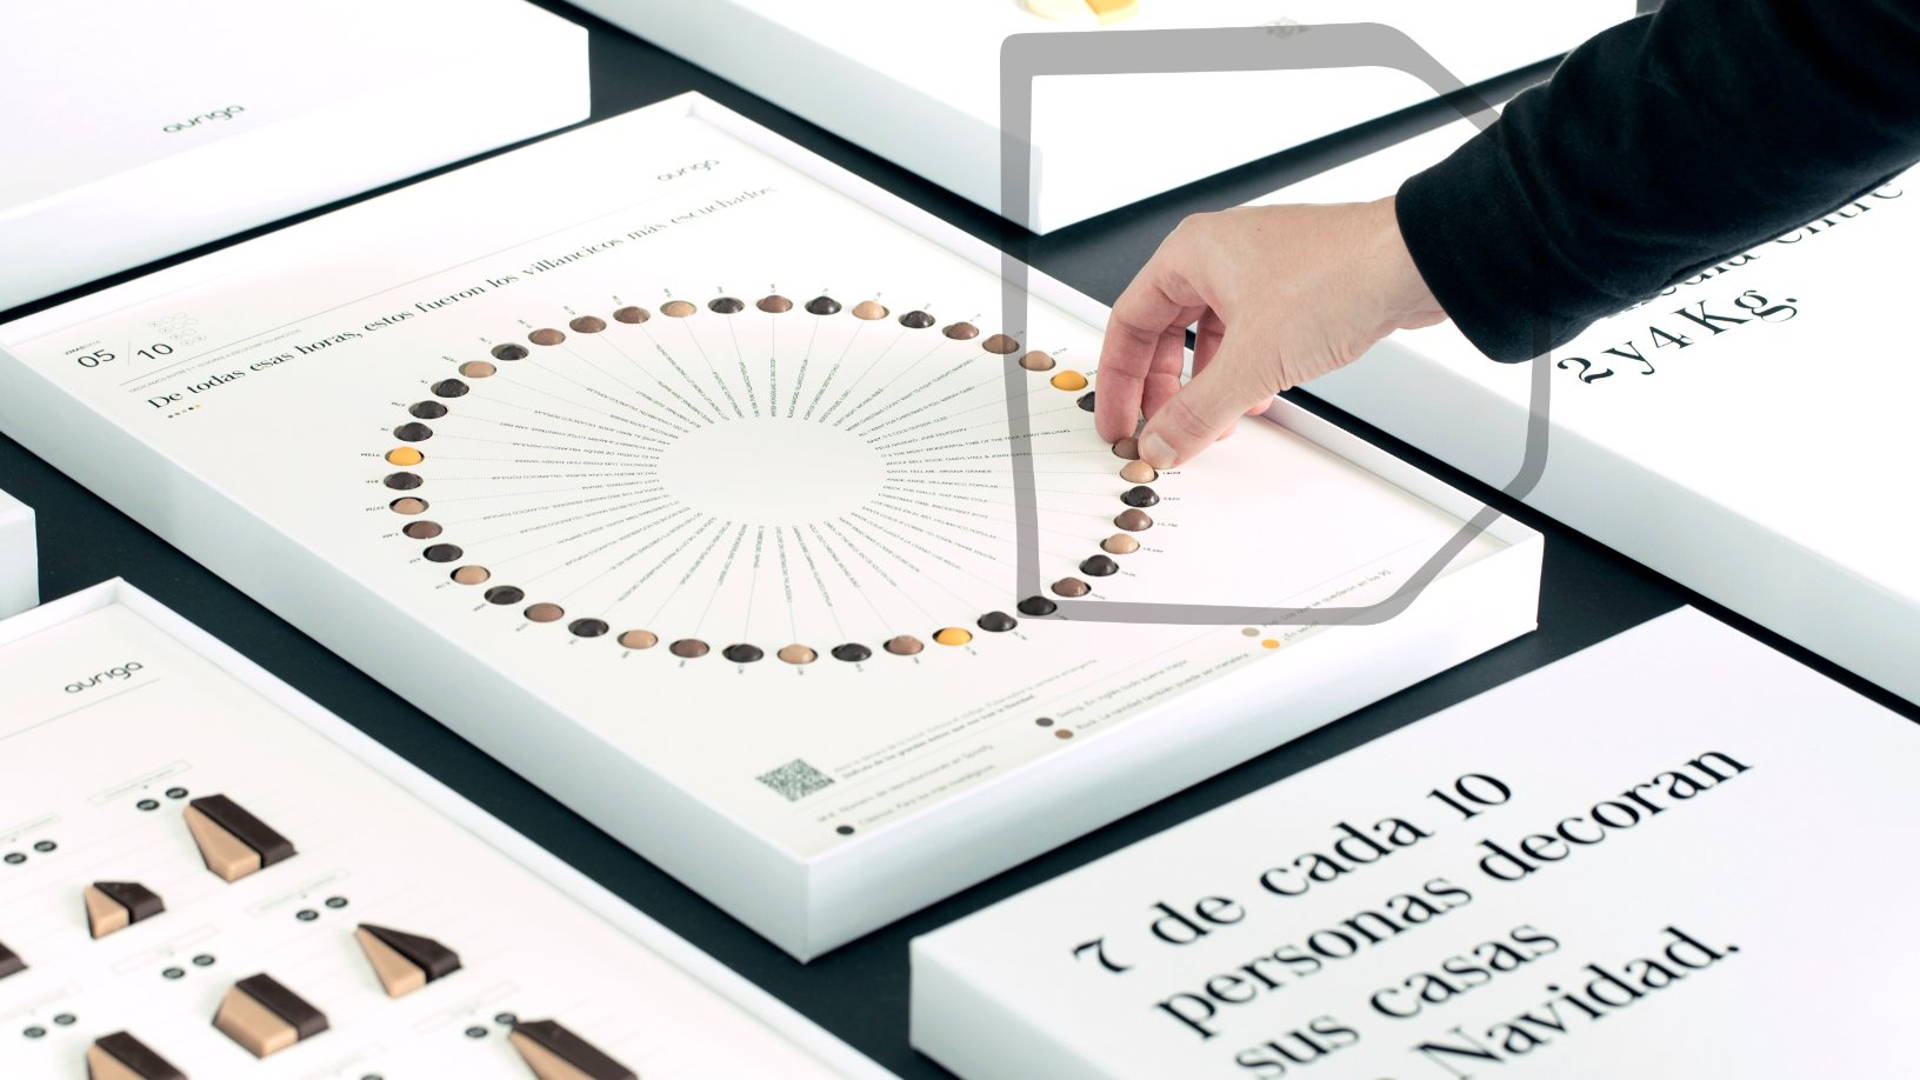 Featured image for Madrid-Based Design Agency Auriga Gave The Gift of Data This Past Christmas